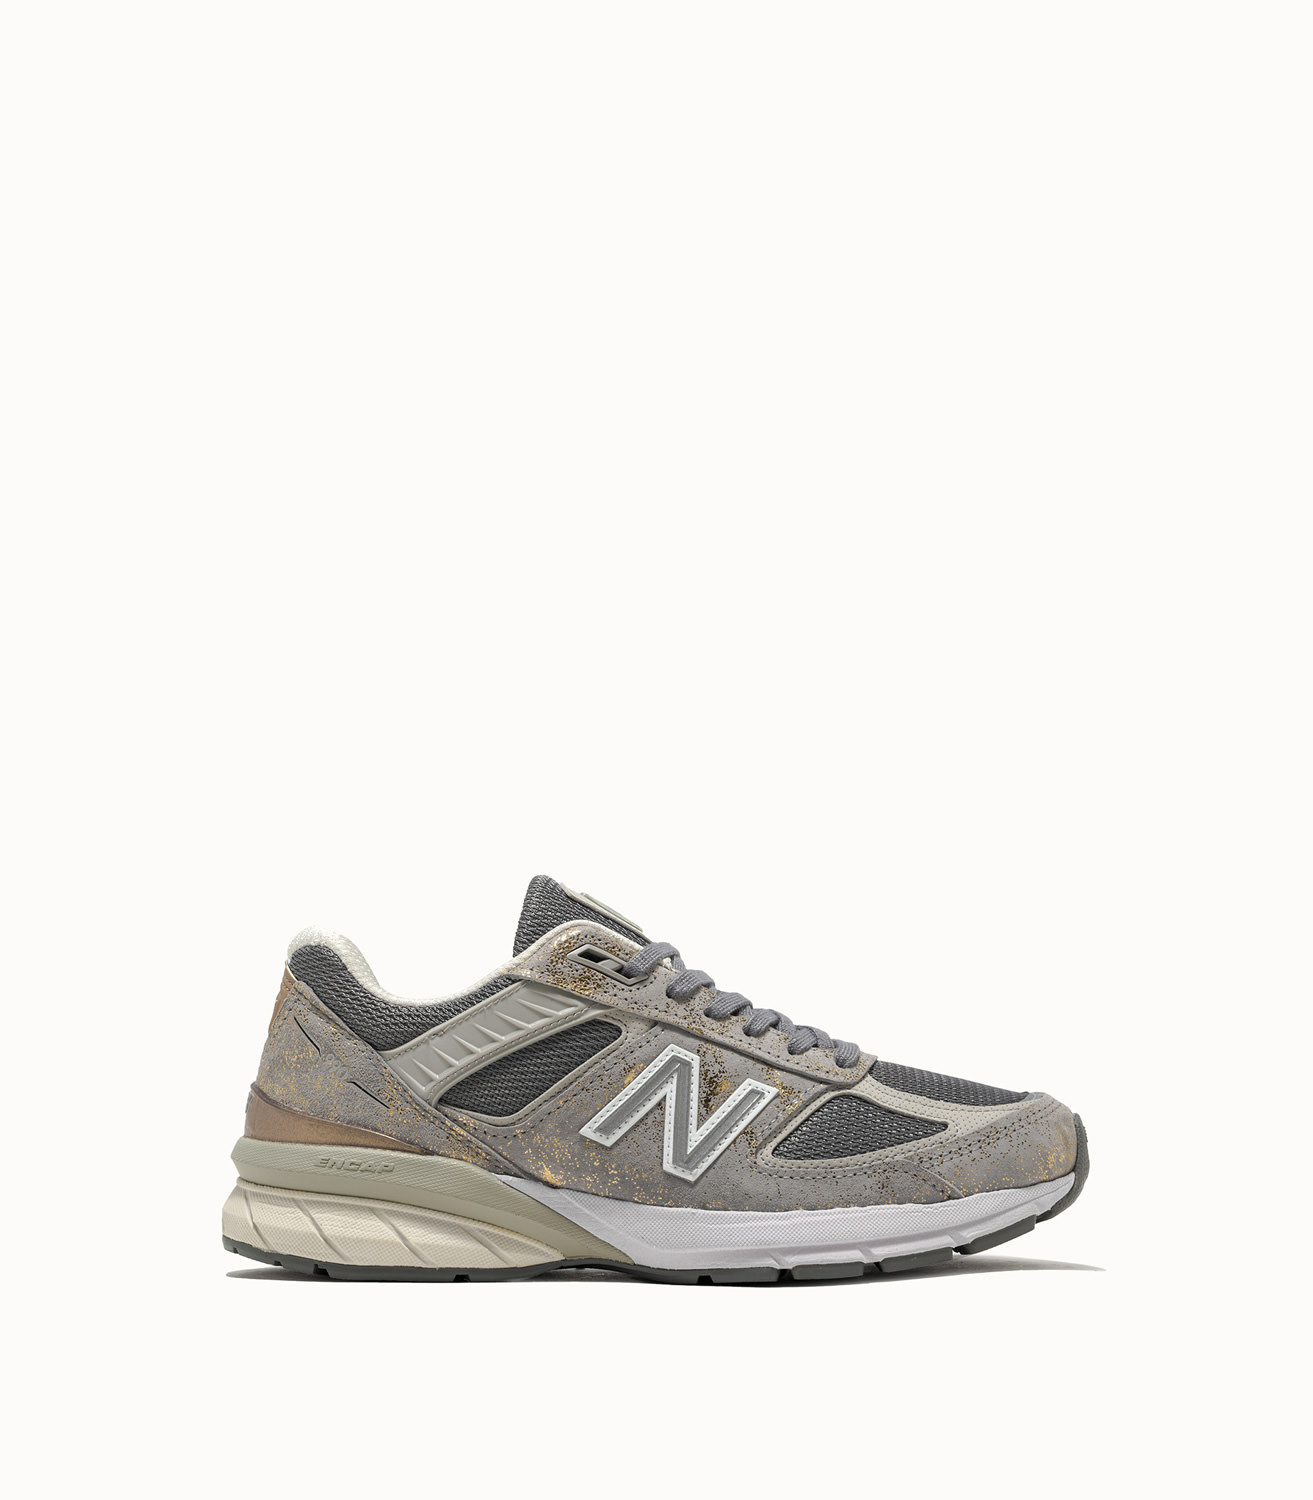 NEW BALANCE 990 LIFESTYLE SNEAKERS COLOR GRAY | Playground